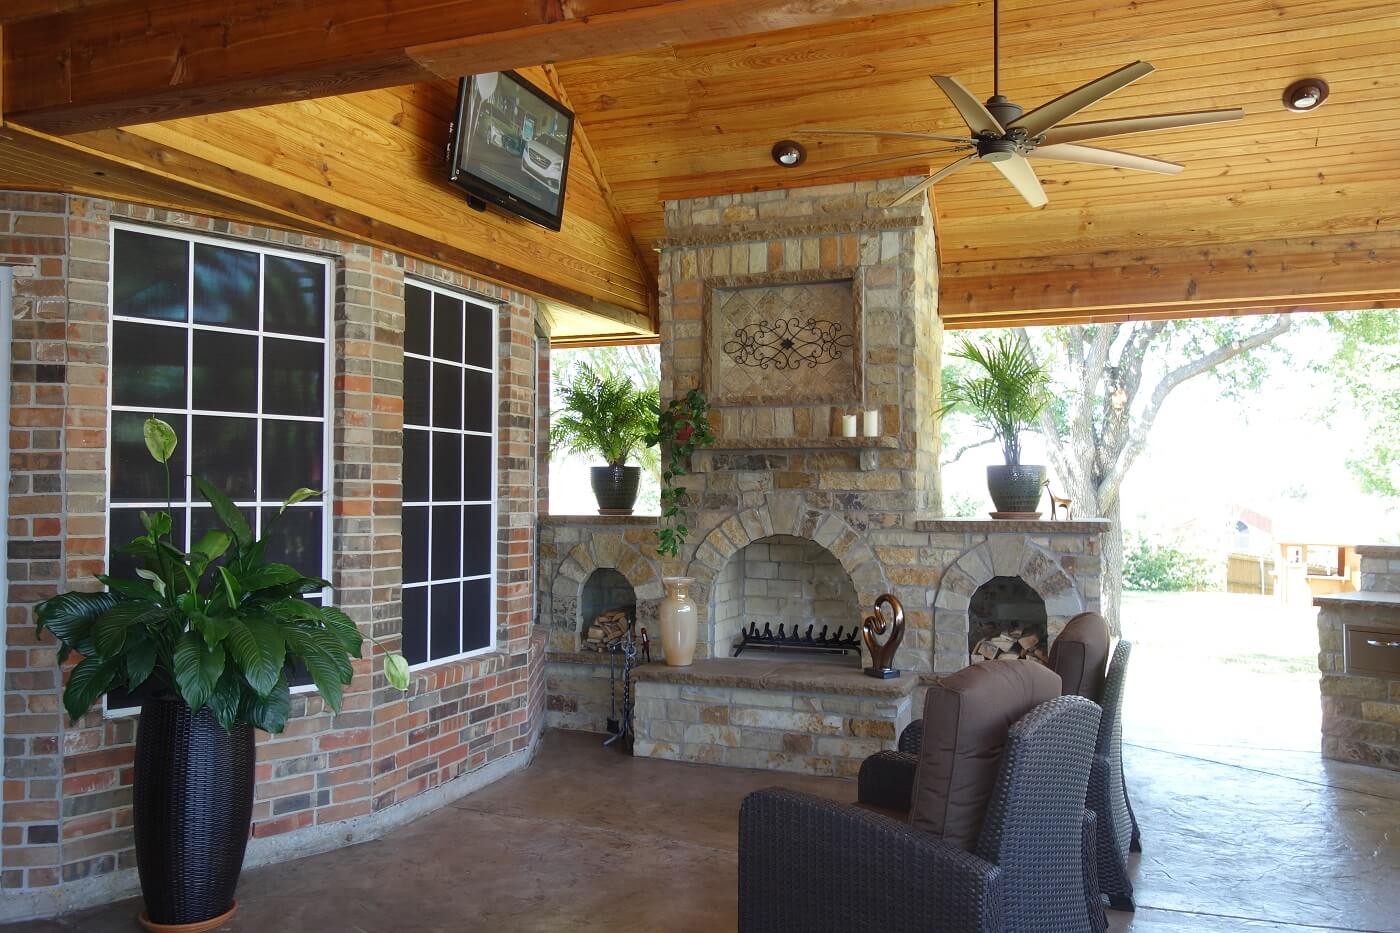 Outdoor patio area with a fireplace